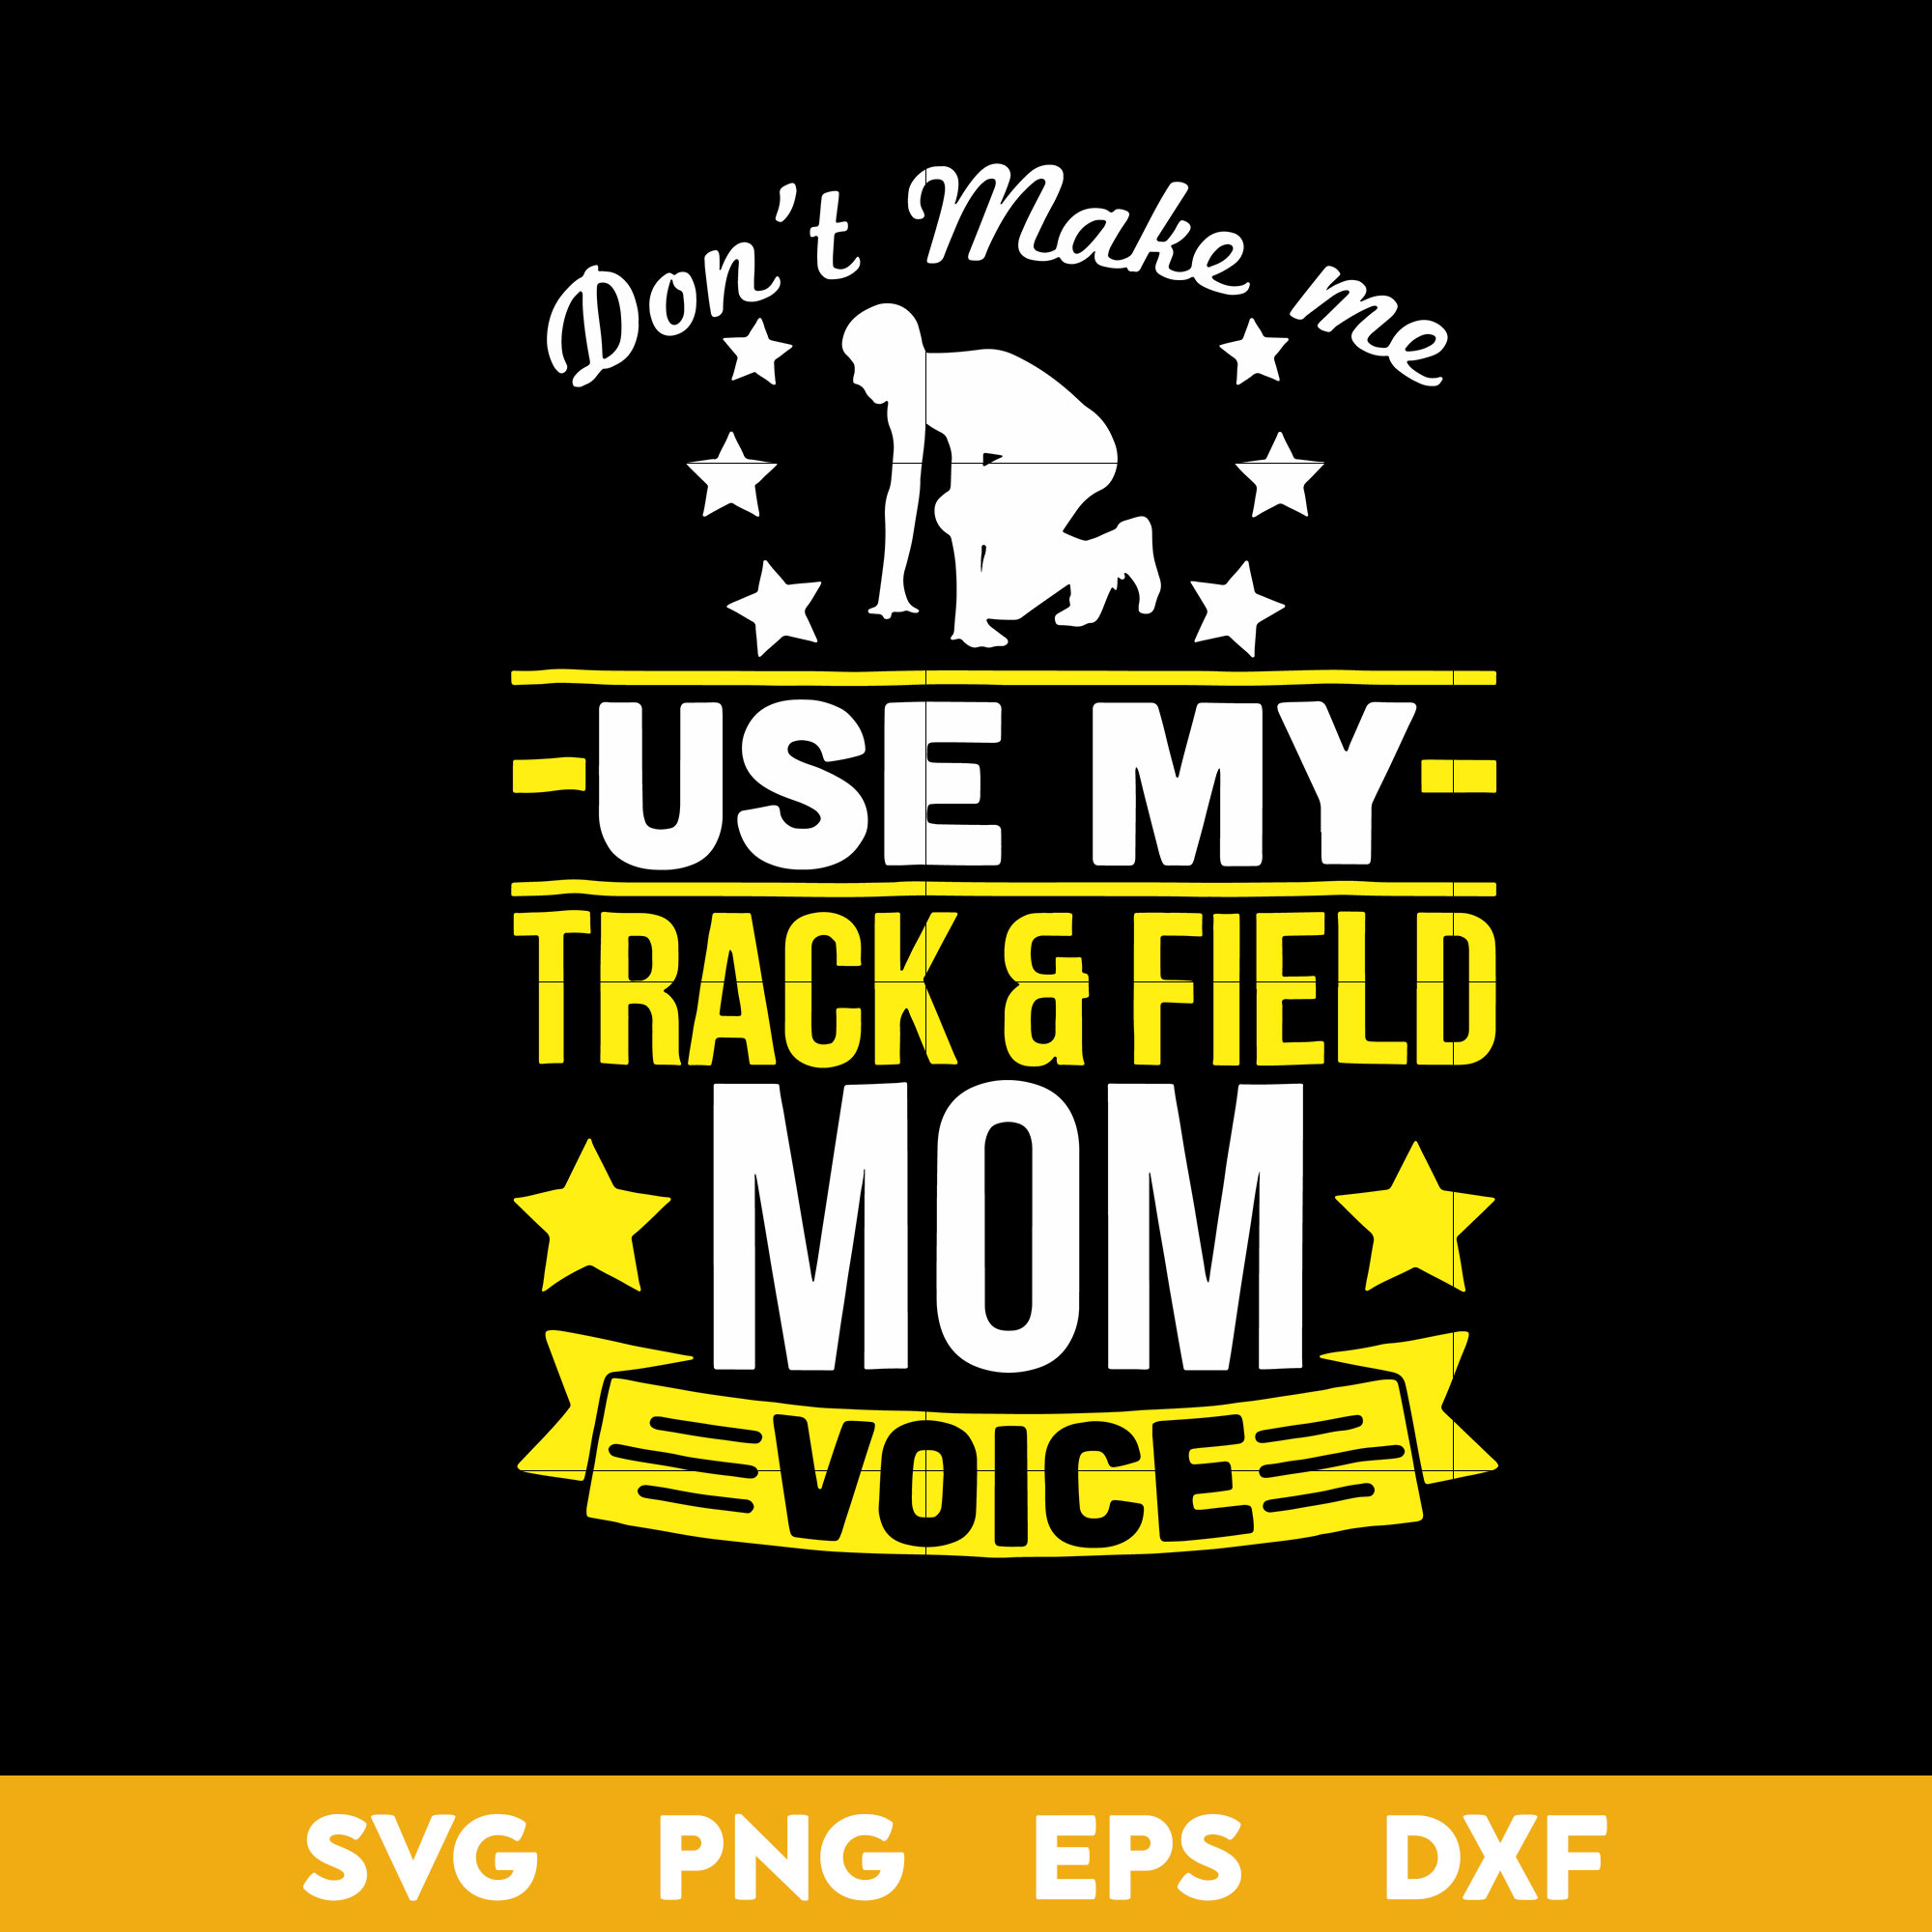 Dont make me use my track field mom voice svg mothers d